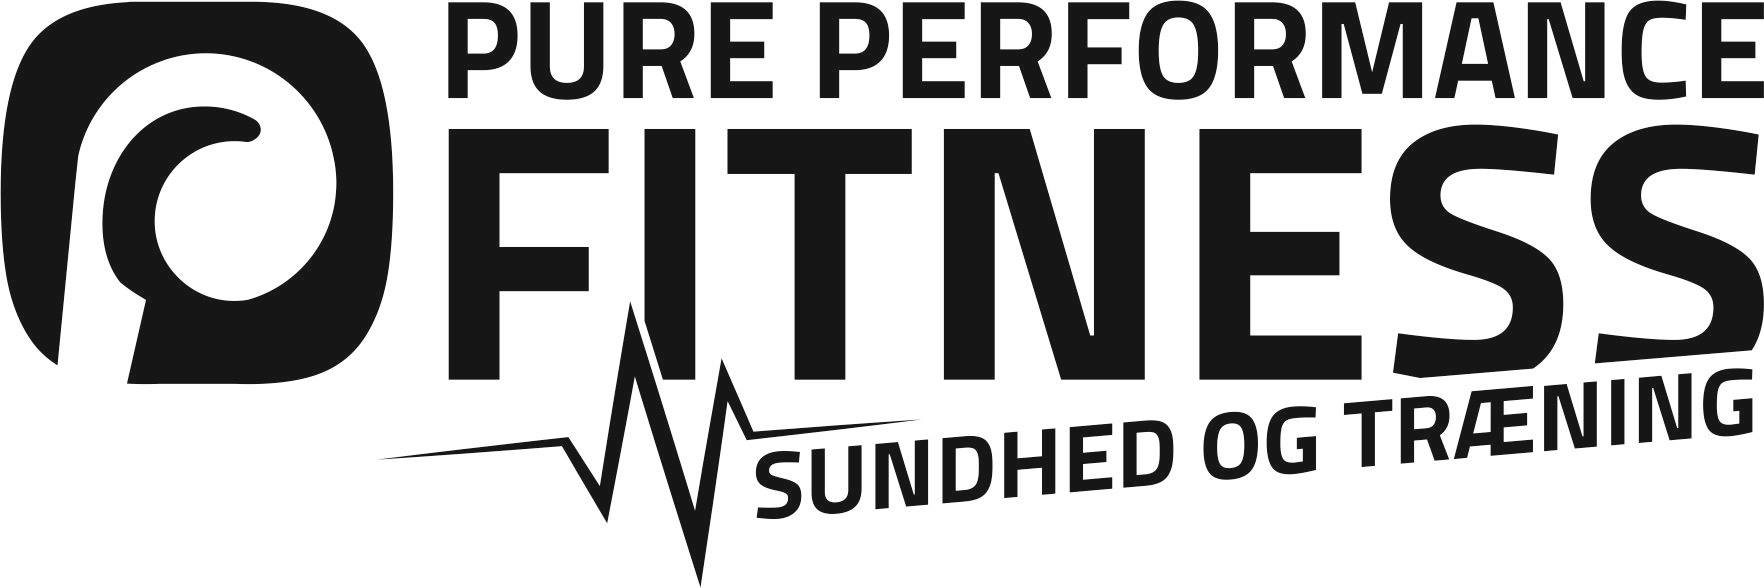 Pure Performance Fitness